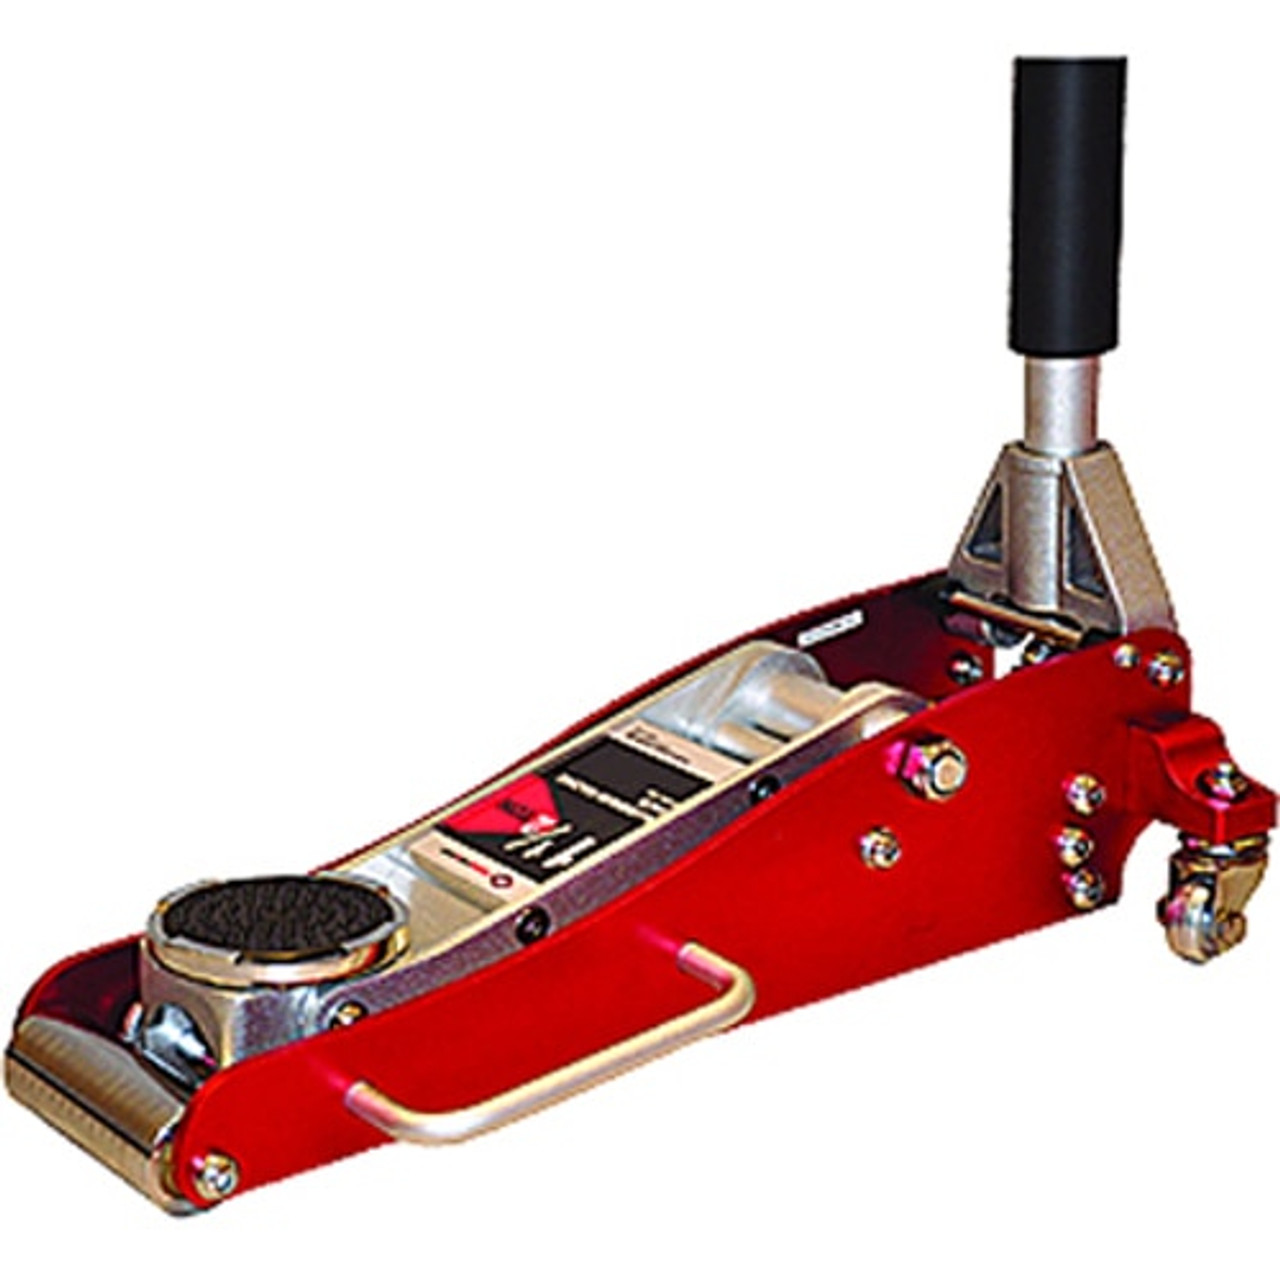 AMERICAN FORGE & FOUNDRY LIGHTWEIGHT 1.5 TON ALUMINUM RACING JACK WITH DOUBLE PUMPER (206)